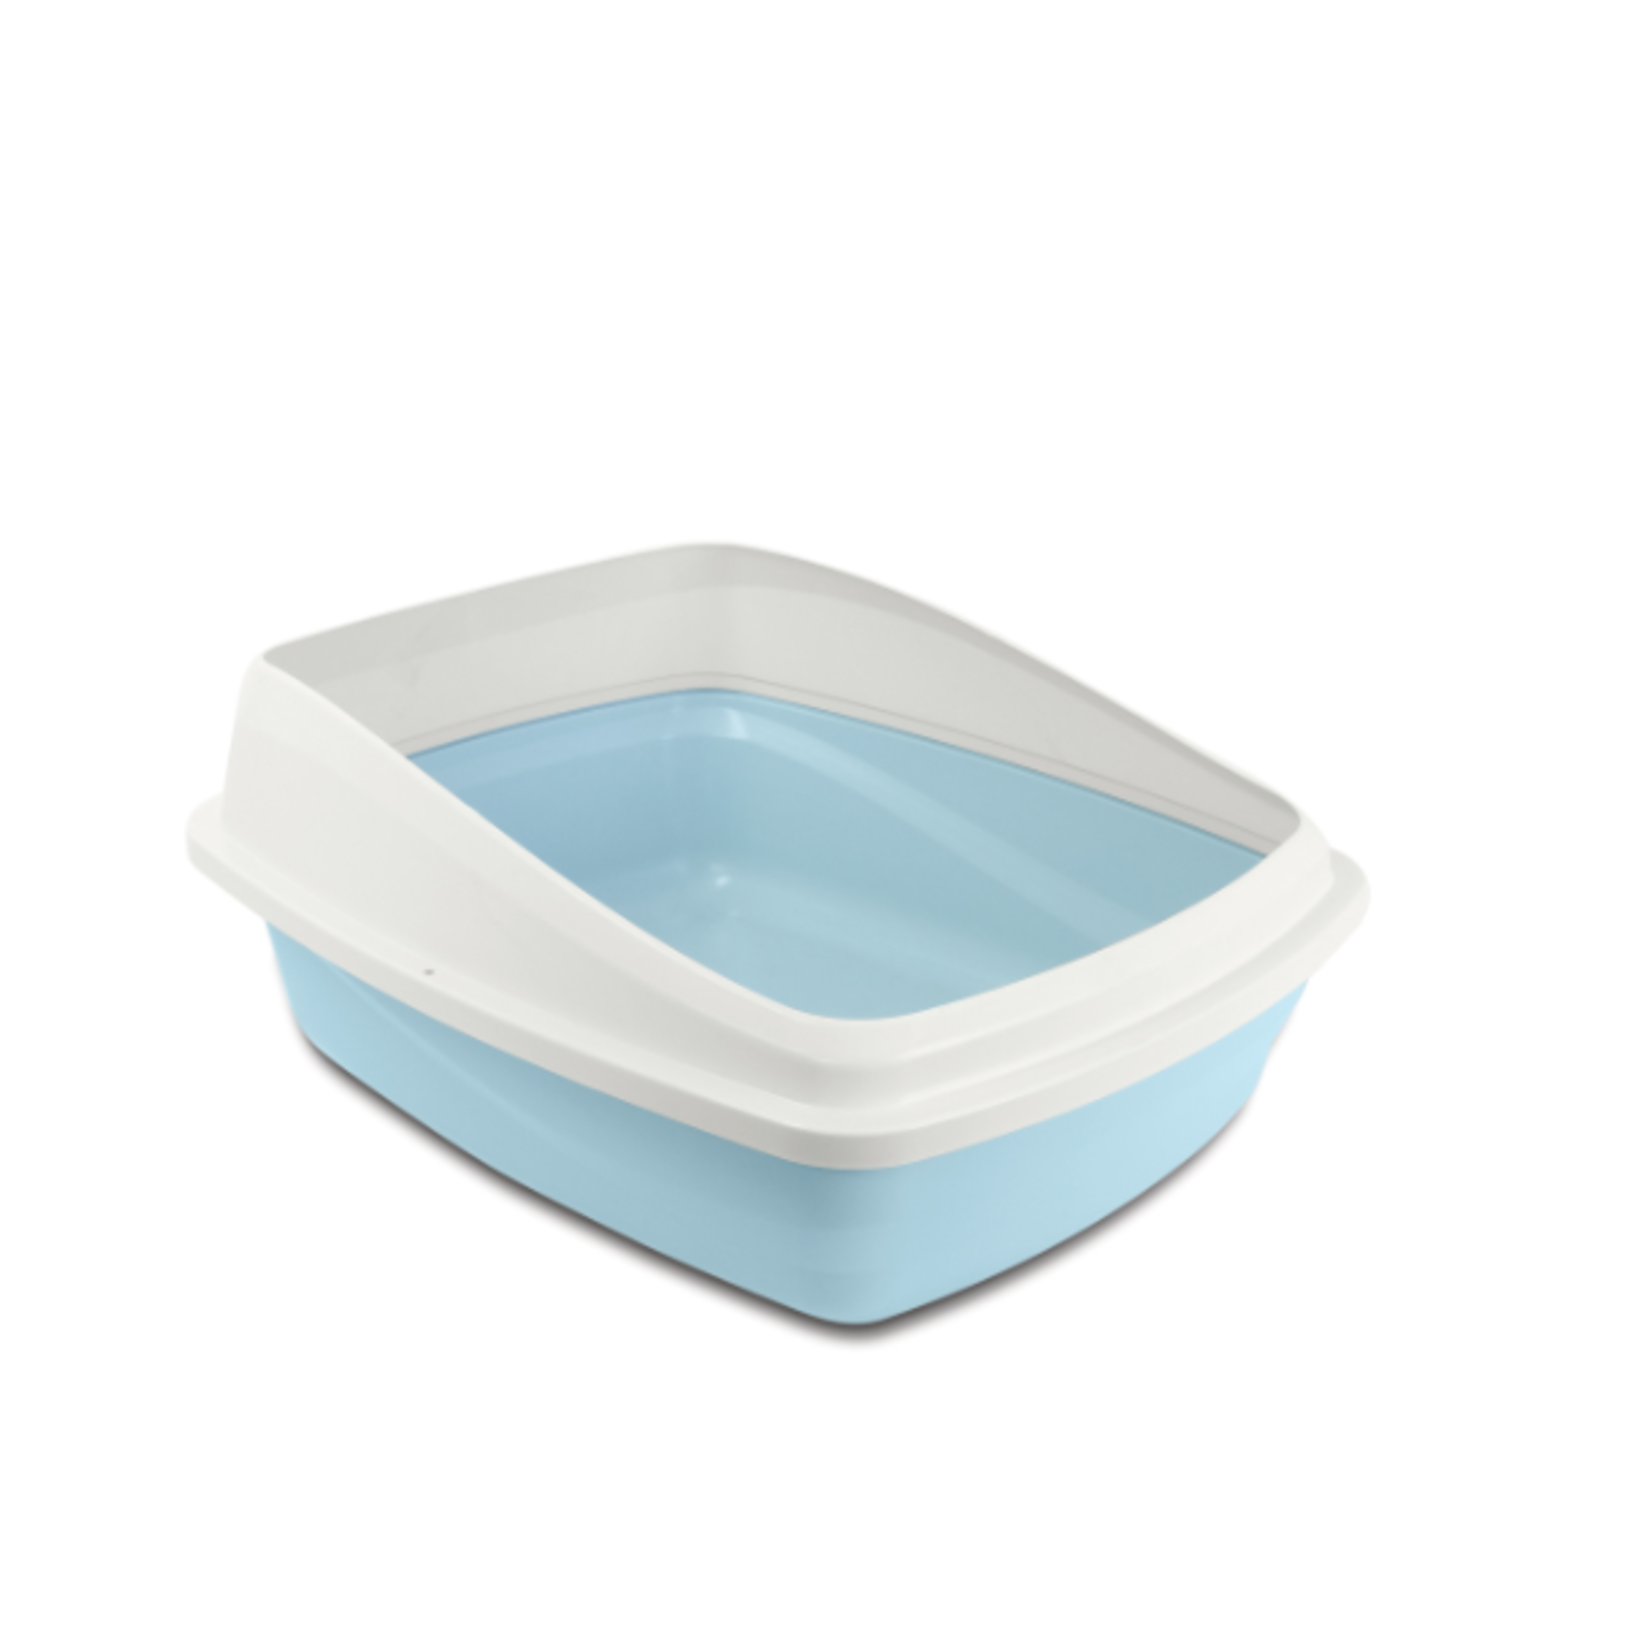 Catit Cat Pan with Removable Rim - Blue & Cool Grey - Medium - 15 x 18.9 x 8.6 in